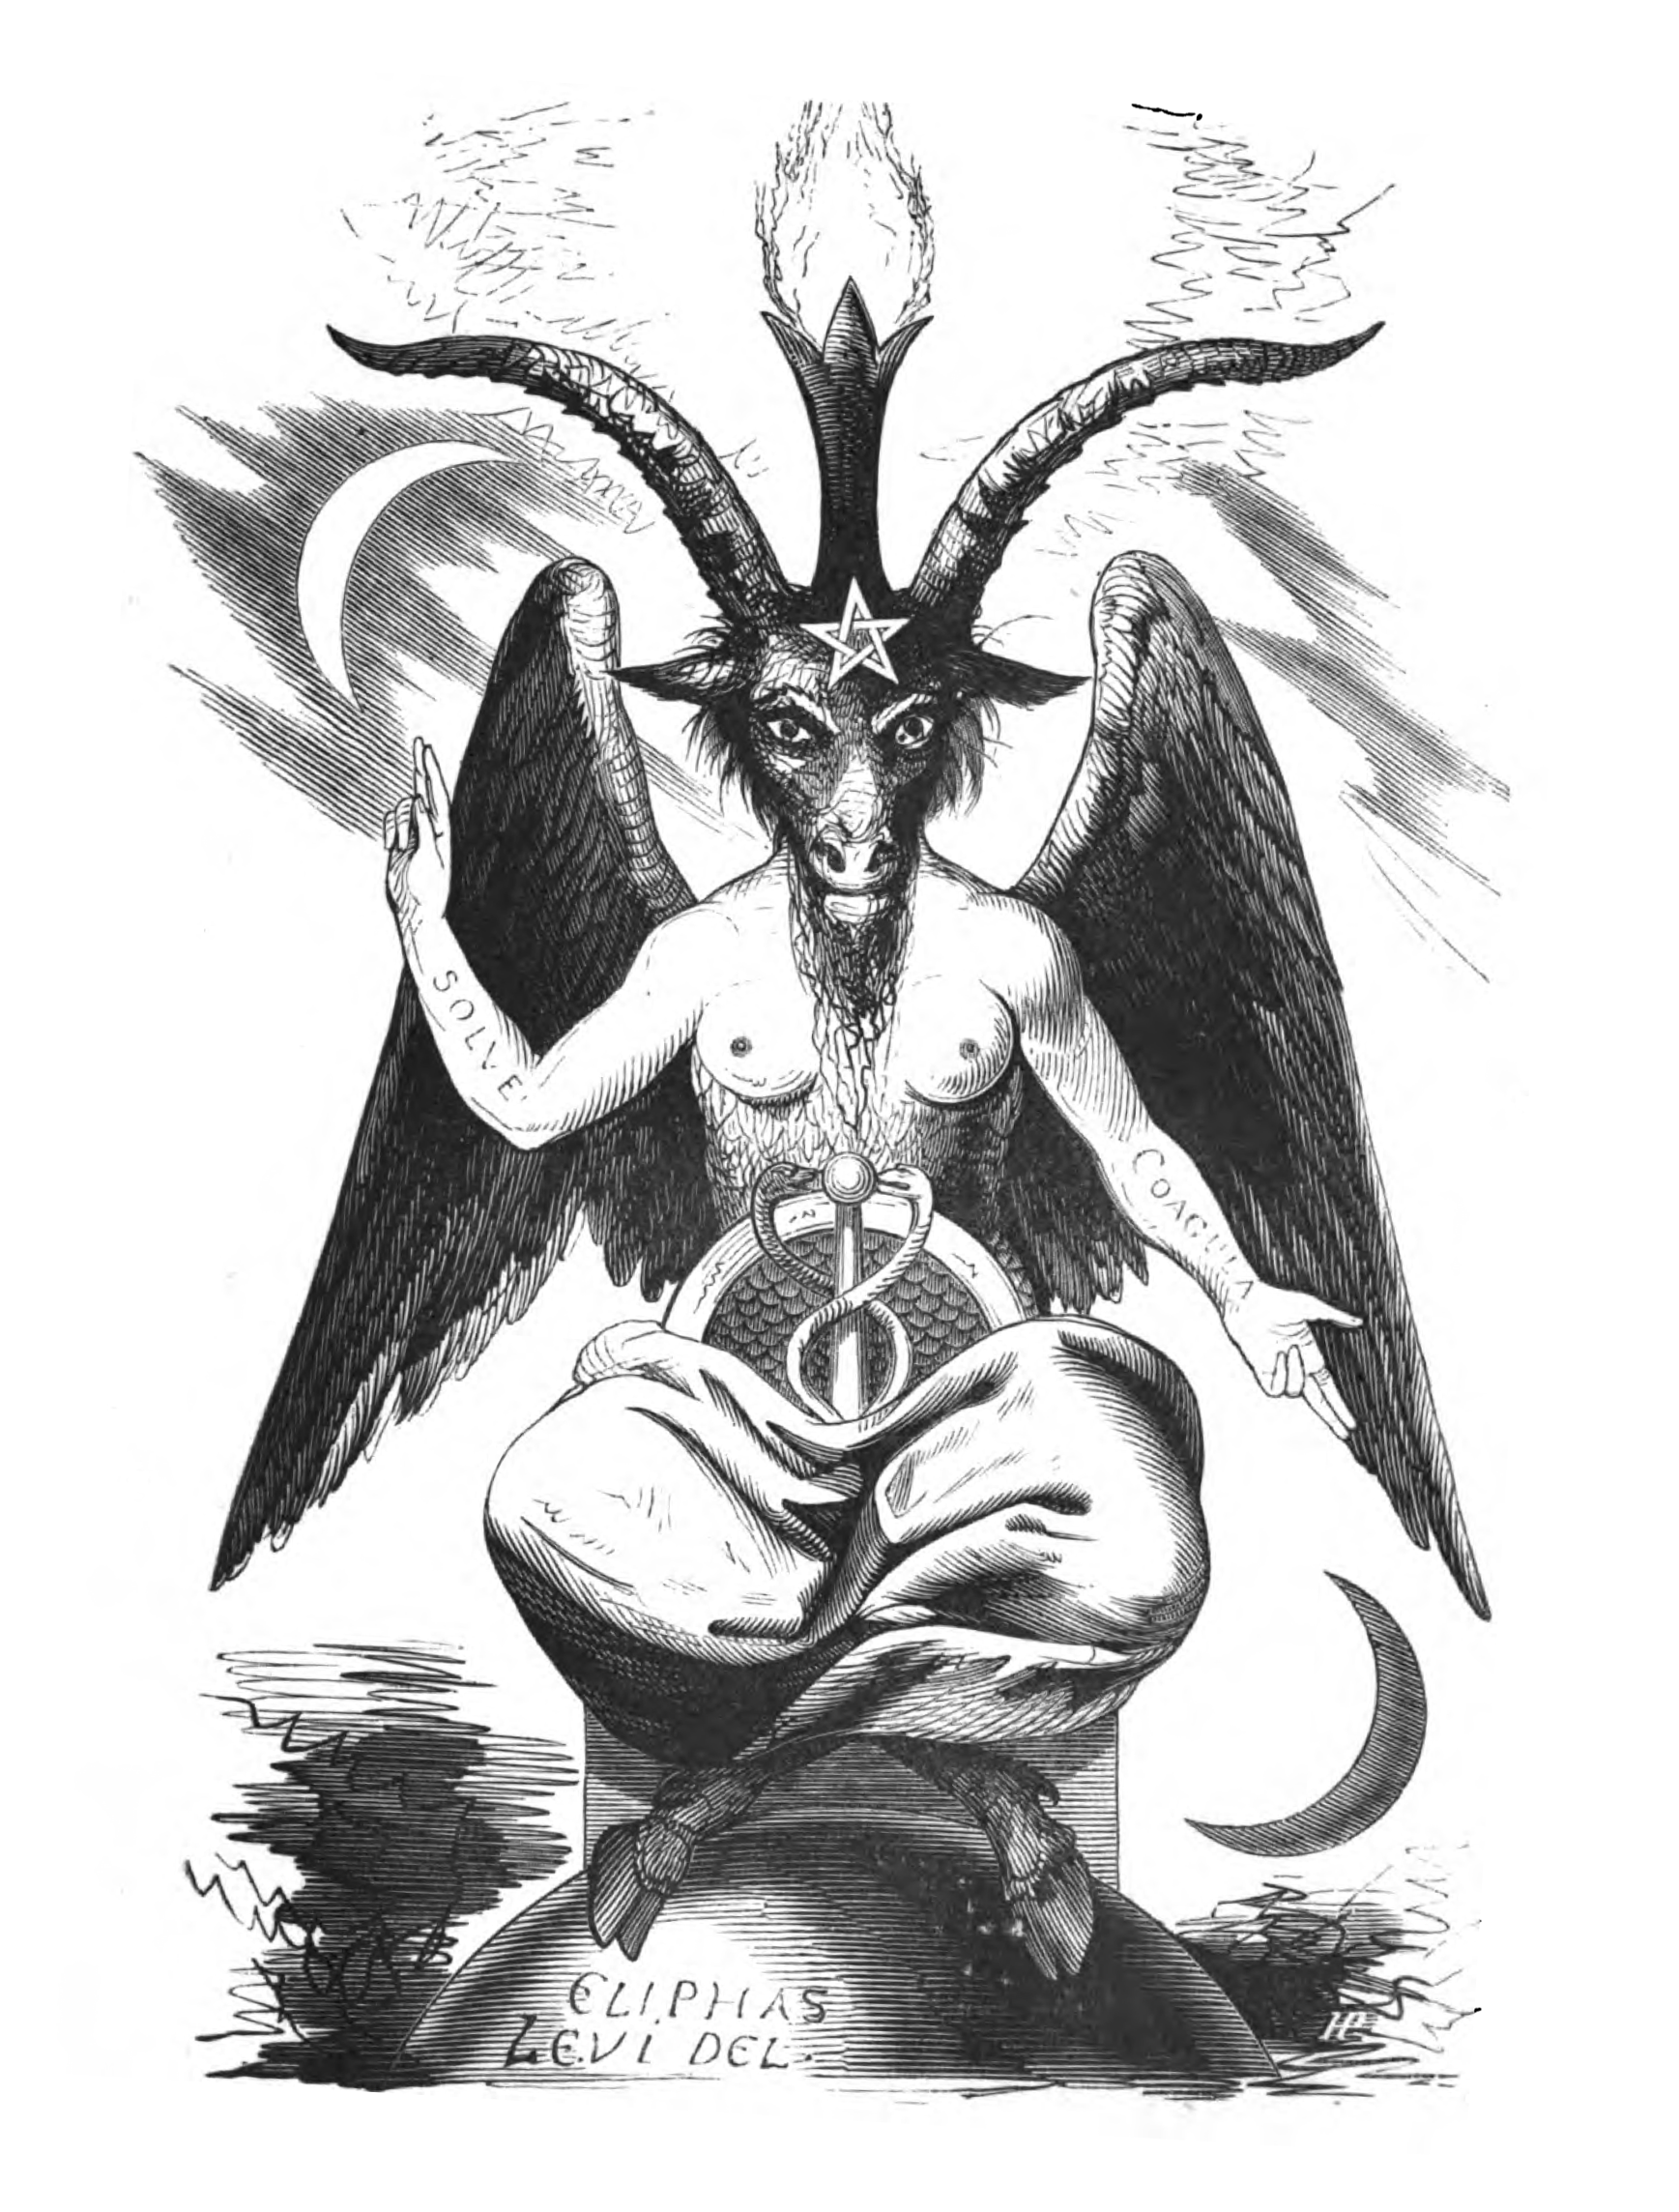 https://upload.wikimedia.org/wikipedia/commons/a/a4/Baphomet.png